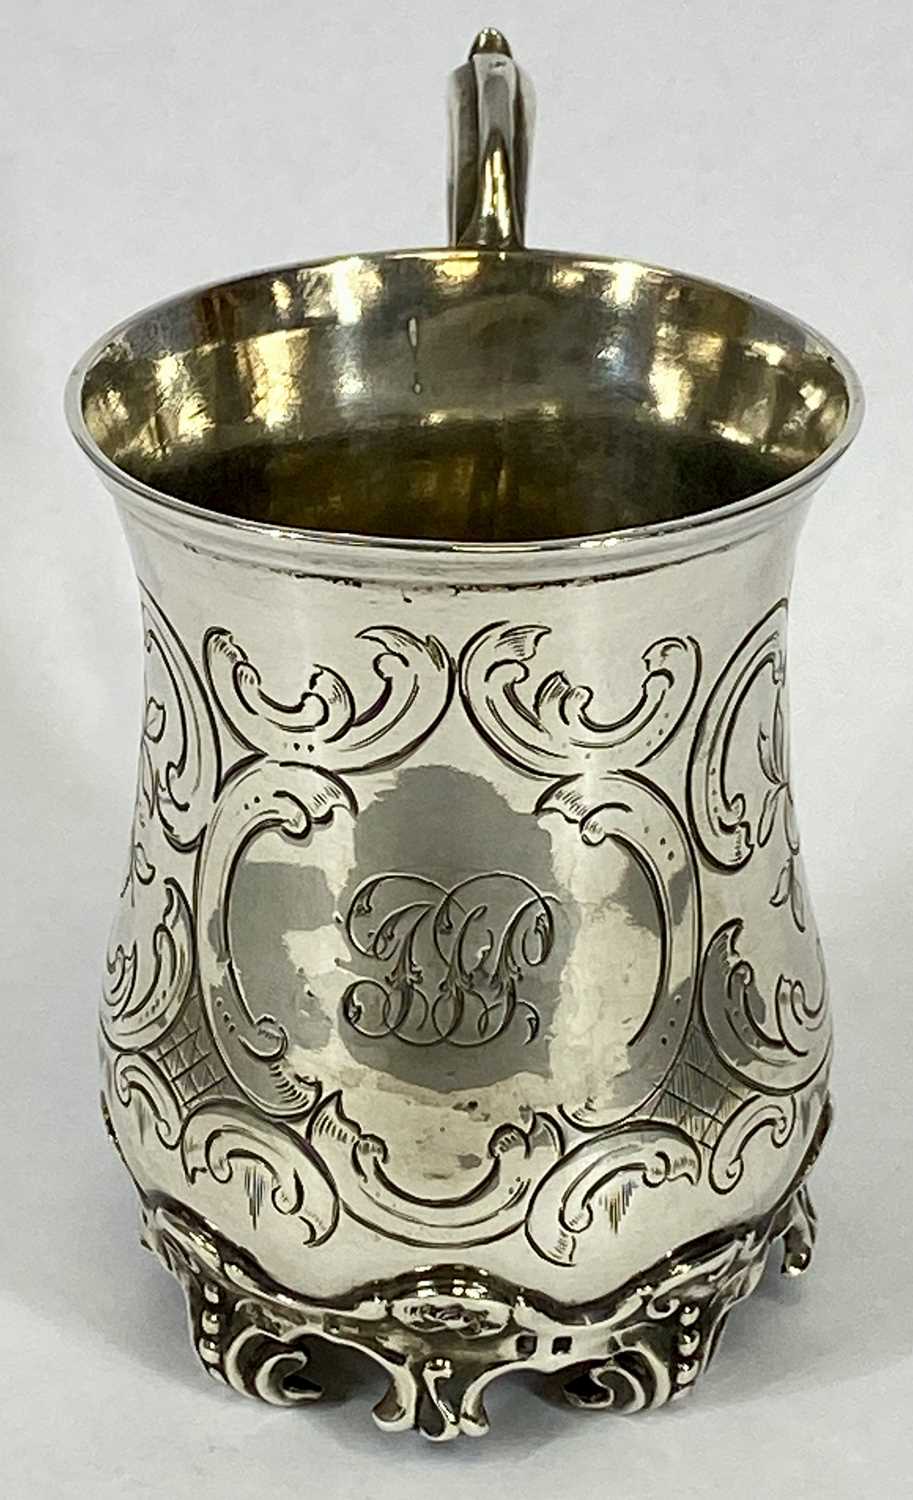 VICTORIAN SILVER CHRISTENING MUG, waisted body, engraved with scrolls and monogram in cartouche, - Image 2 of 3